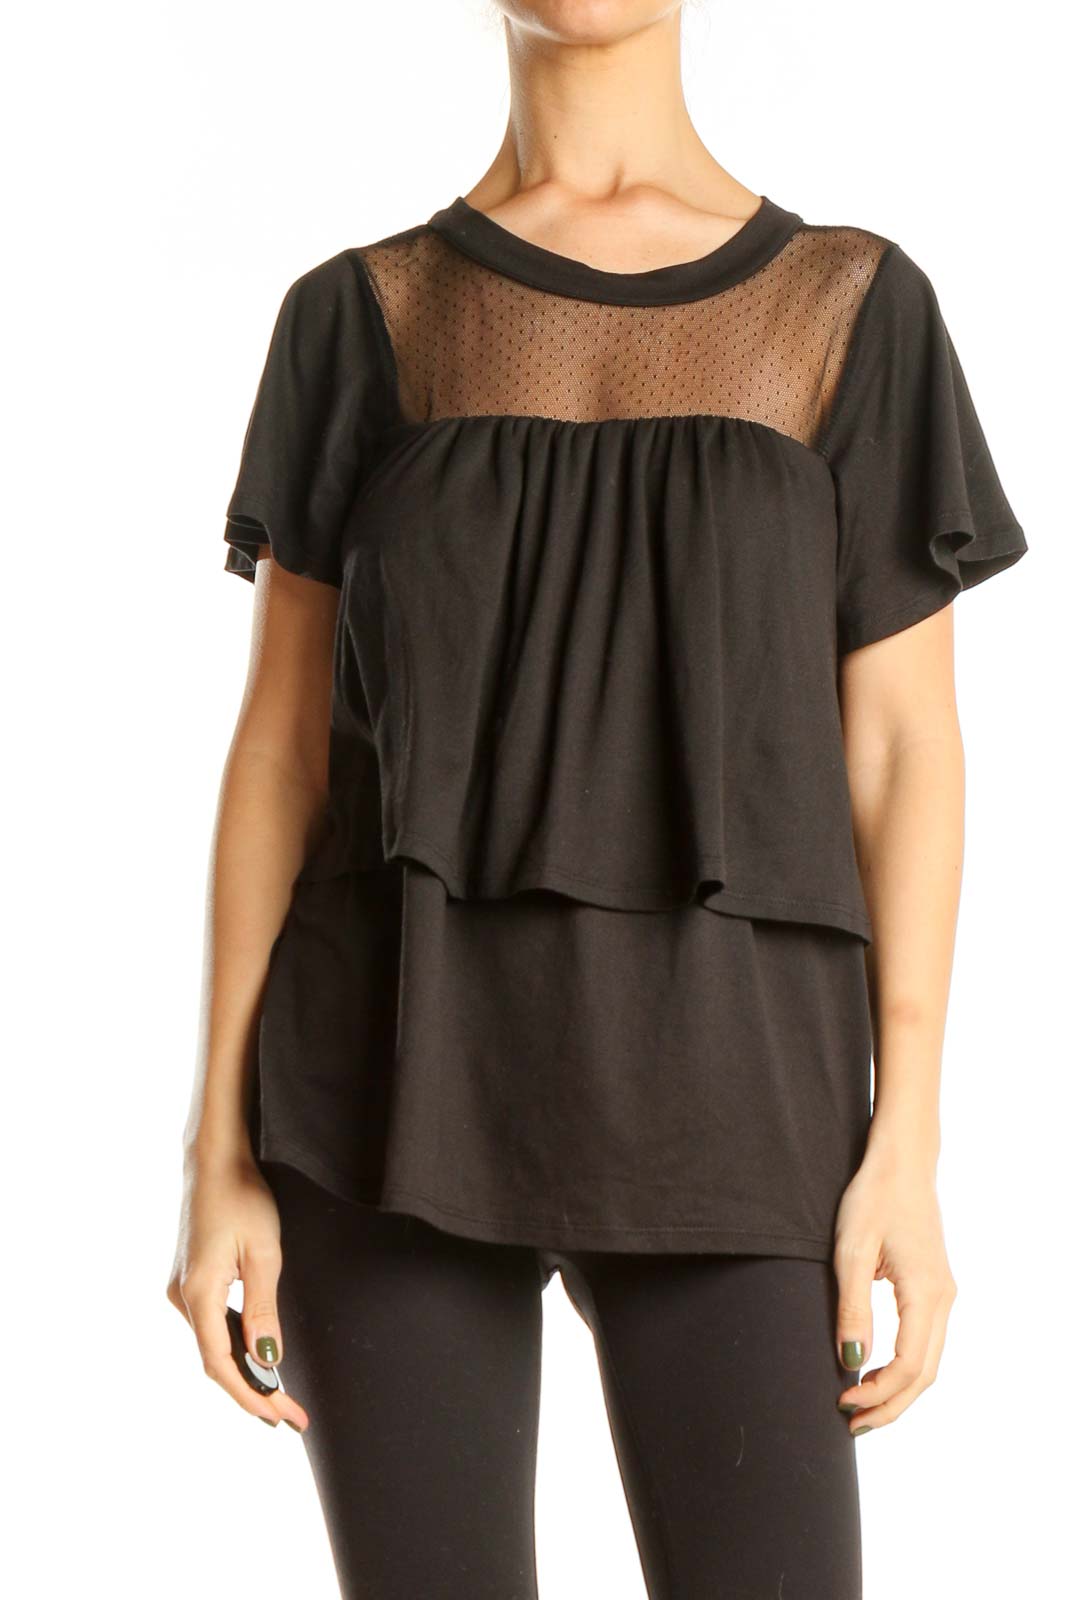 Black Ruffle Chic Top with Polka Dot Mesh Panel Front